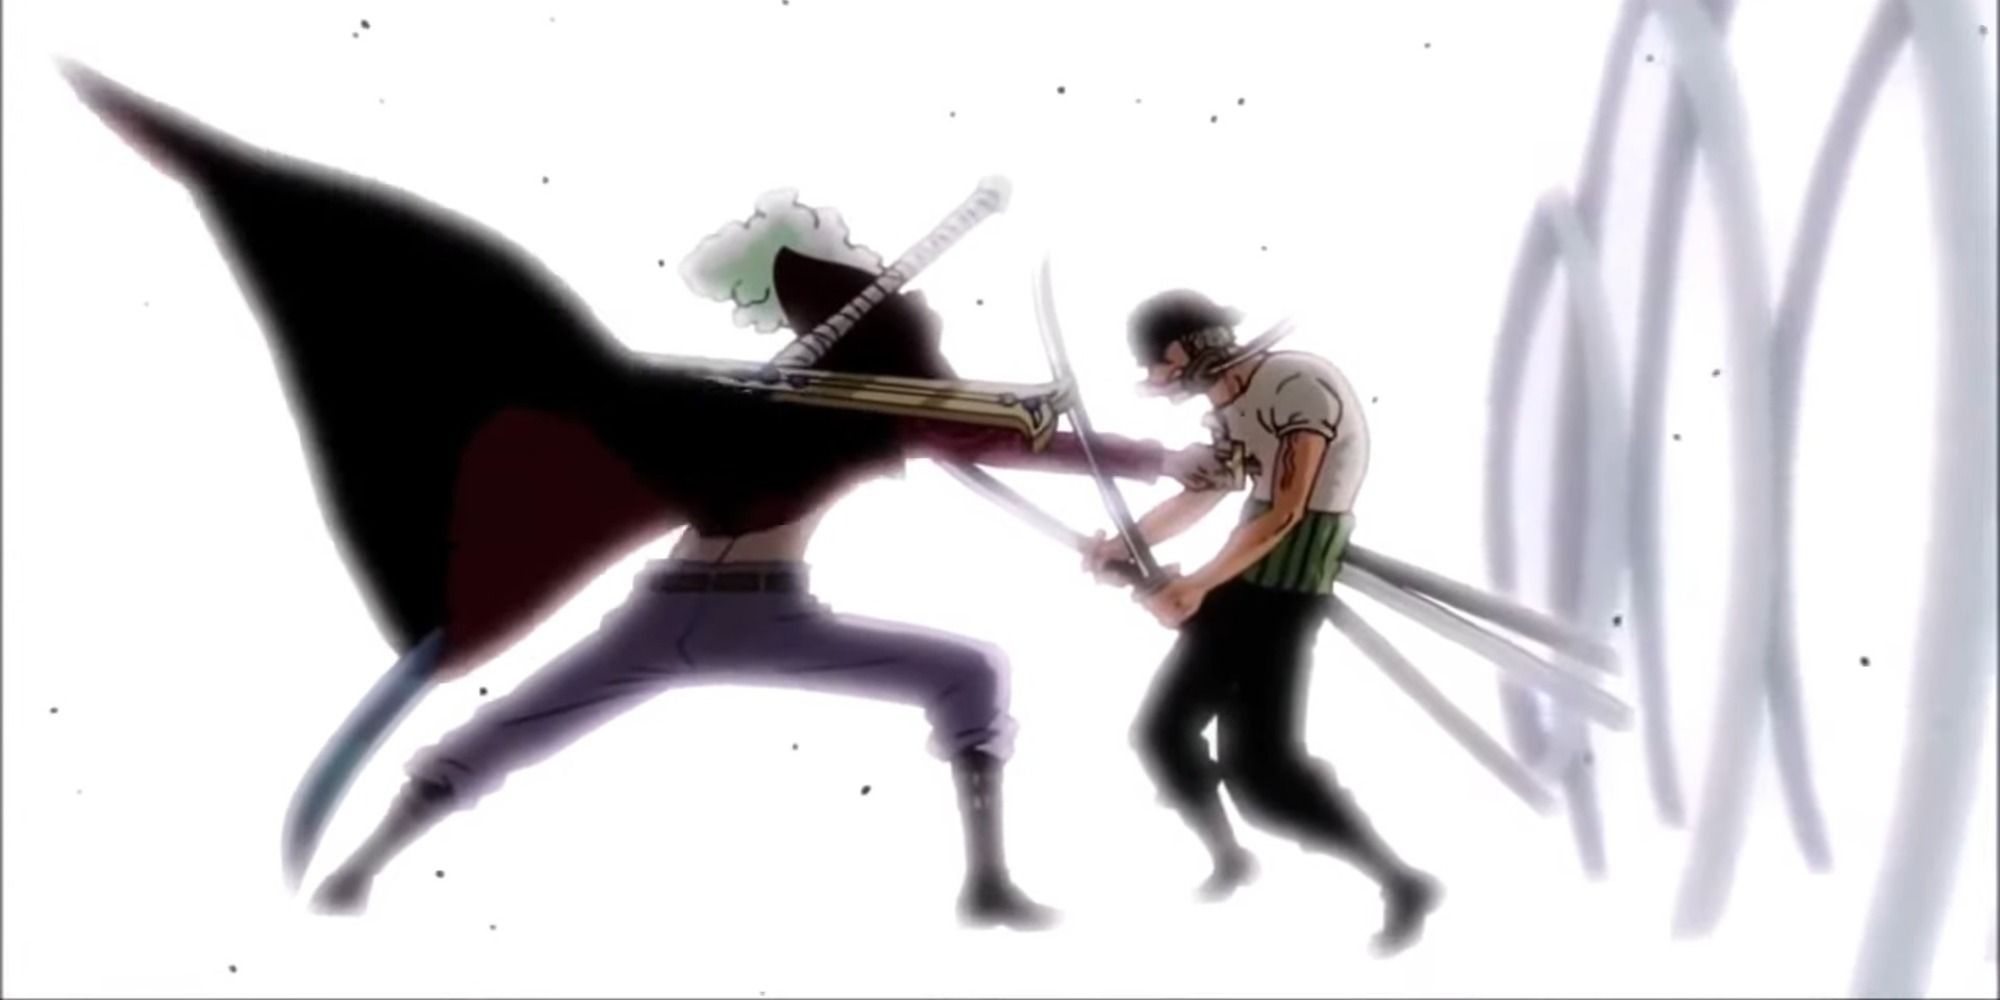 Zoro VS Mihawk is one of the best One Piece fights.